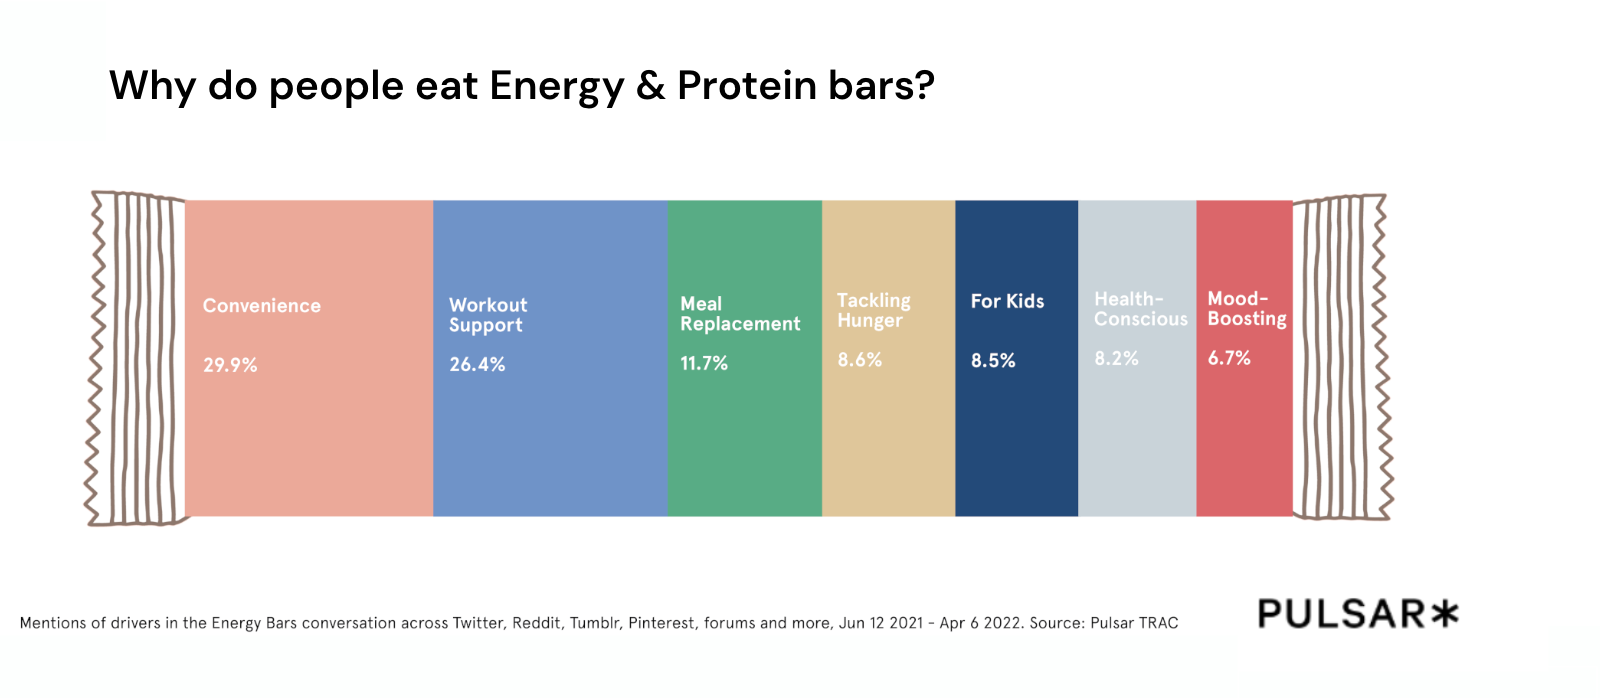 Why do people eat Energy & Protein bars?
